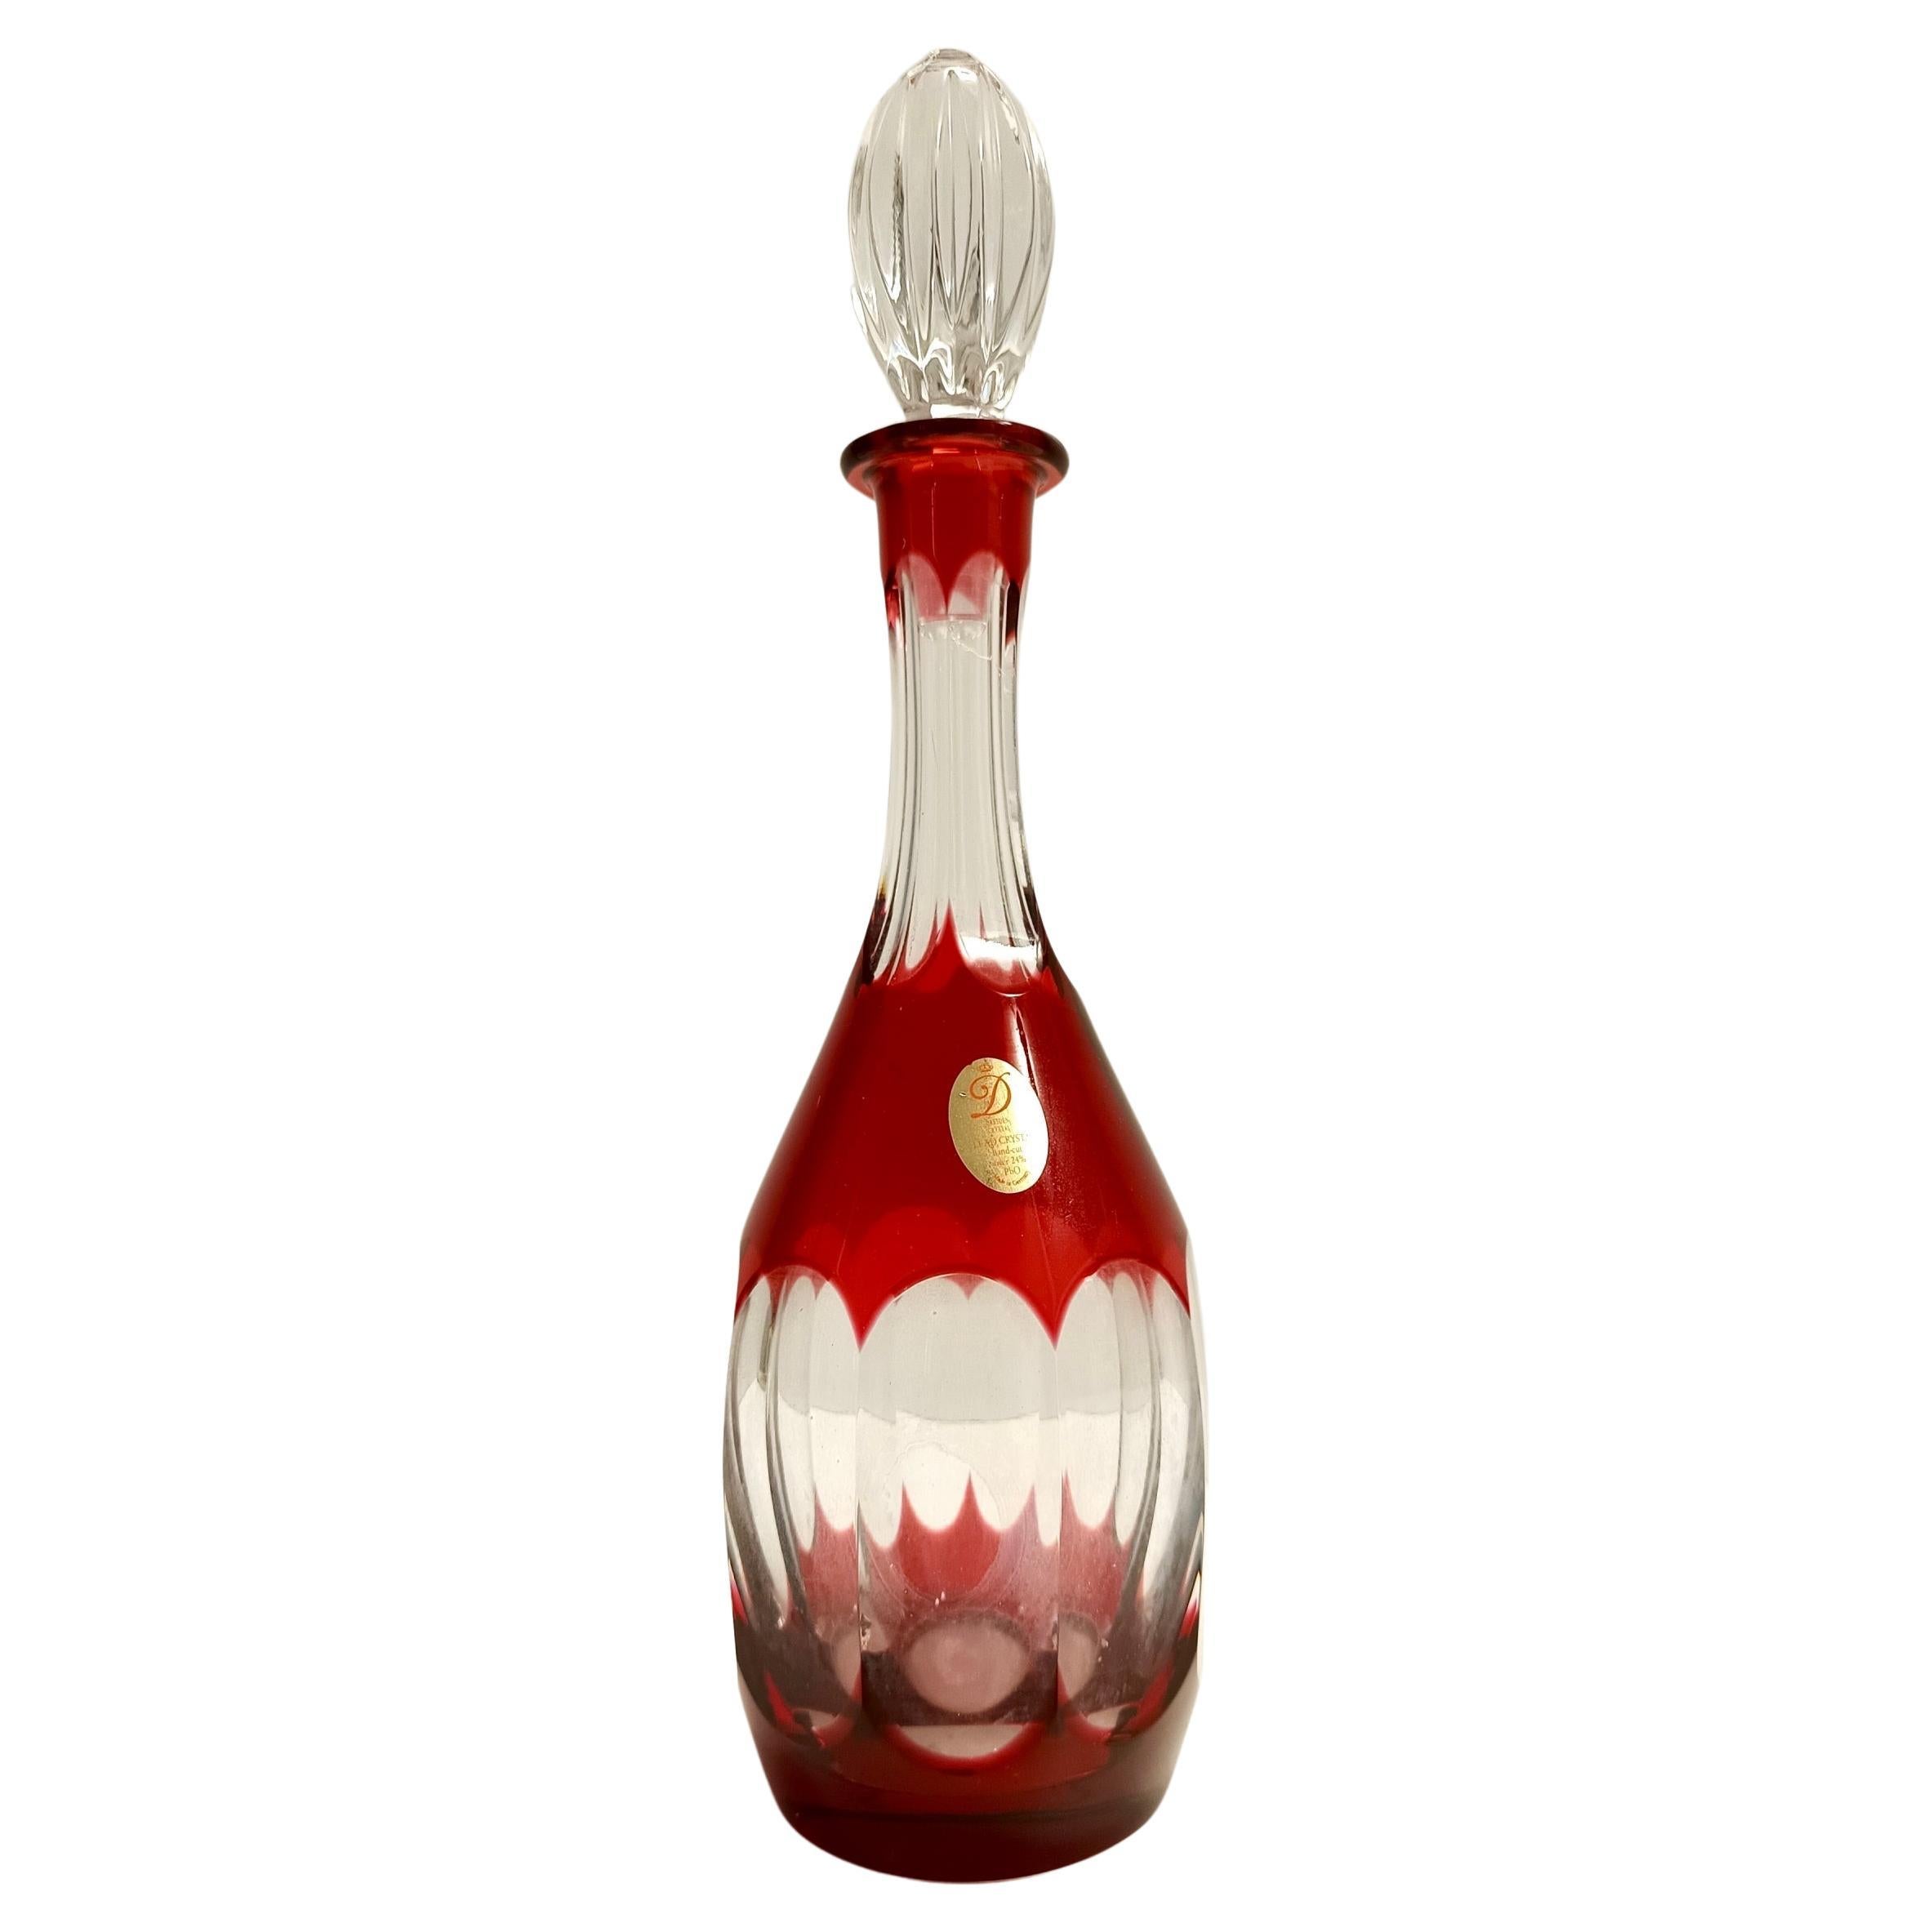 Bohemian Transparent and Red Crystal Decanter Bottle by Dresden Crystal, Italy